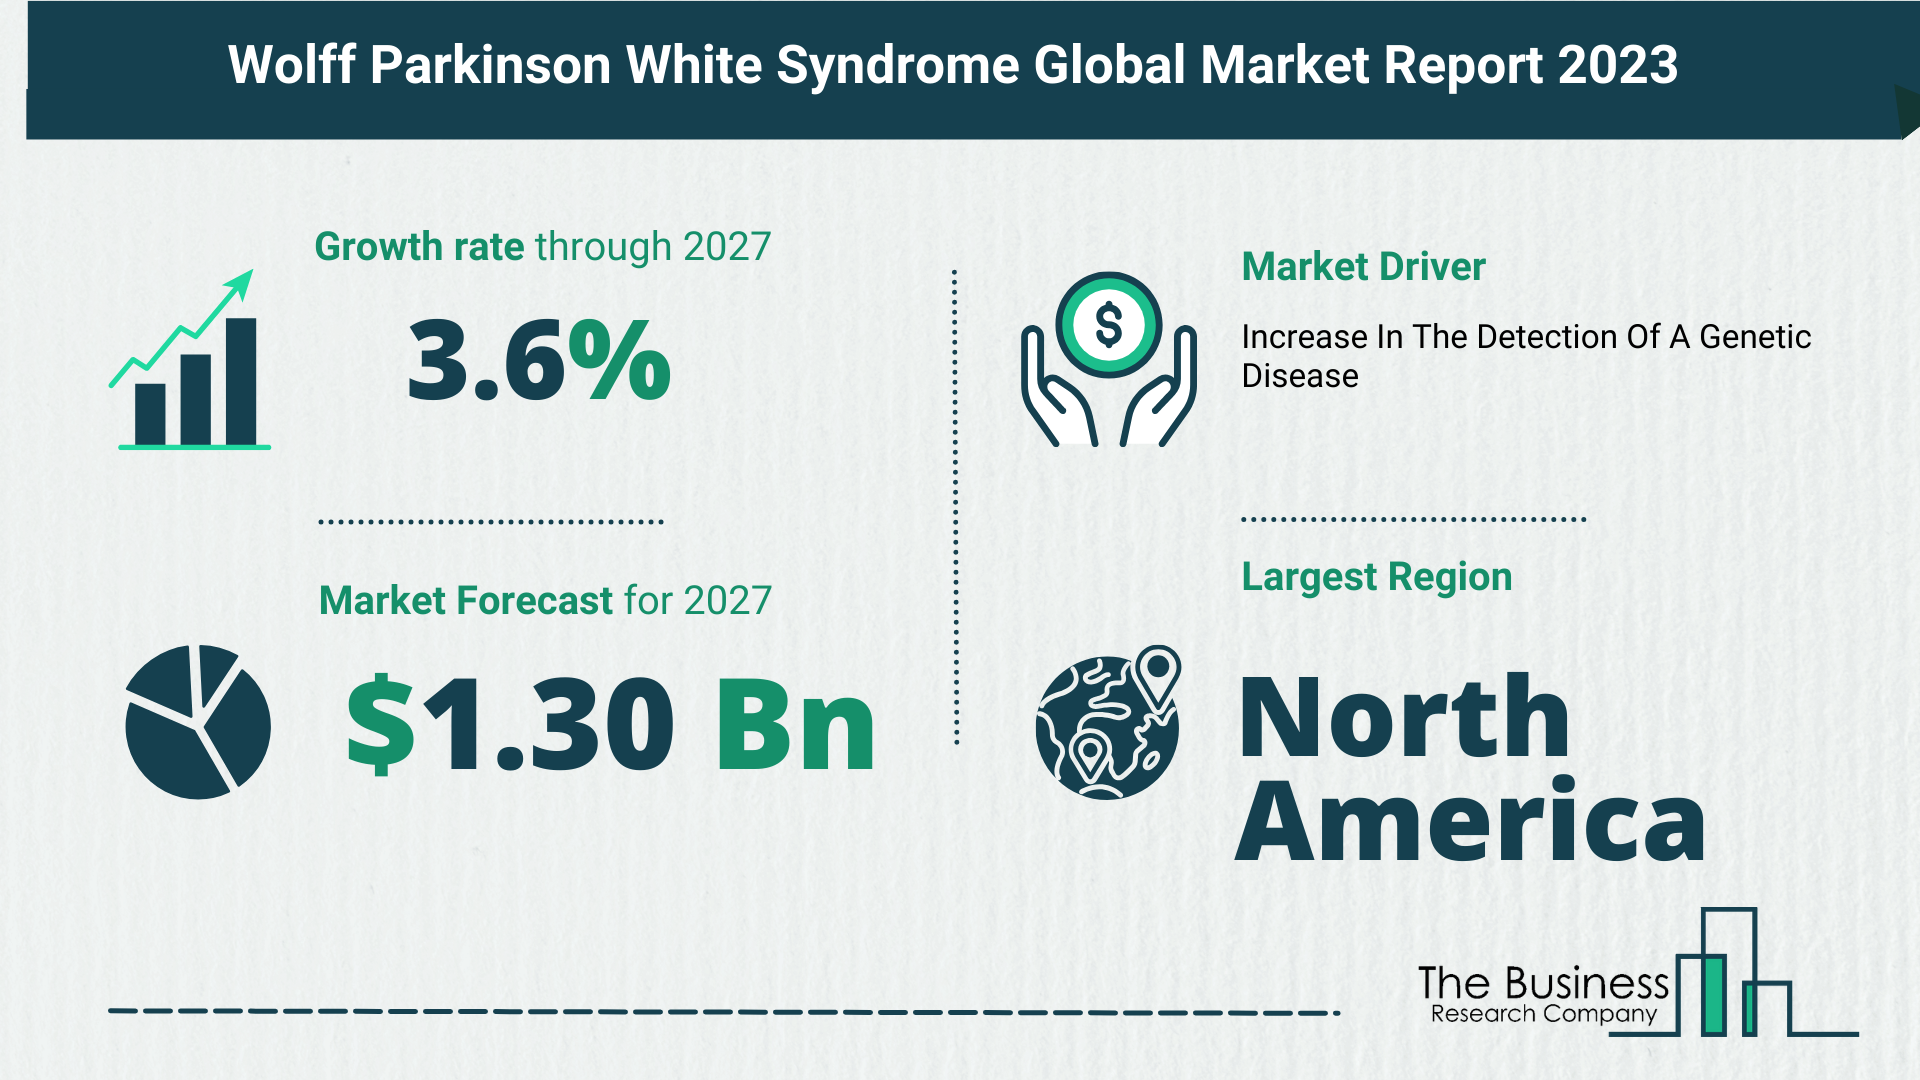 Global Wolff Parkinson White Syndrome Market